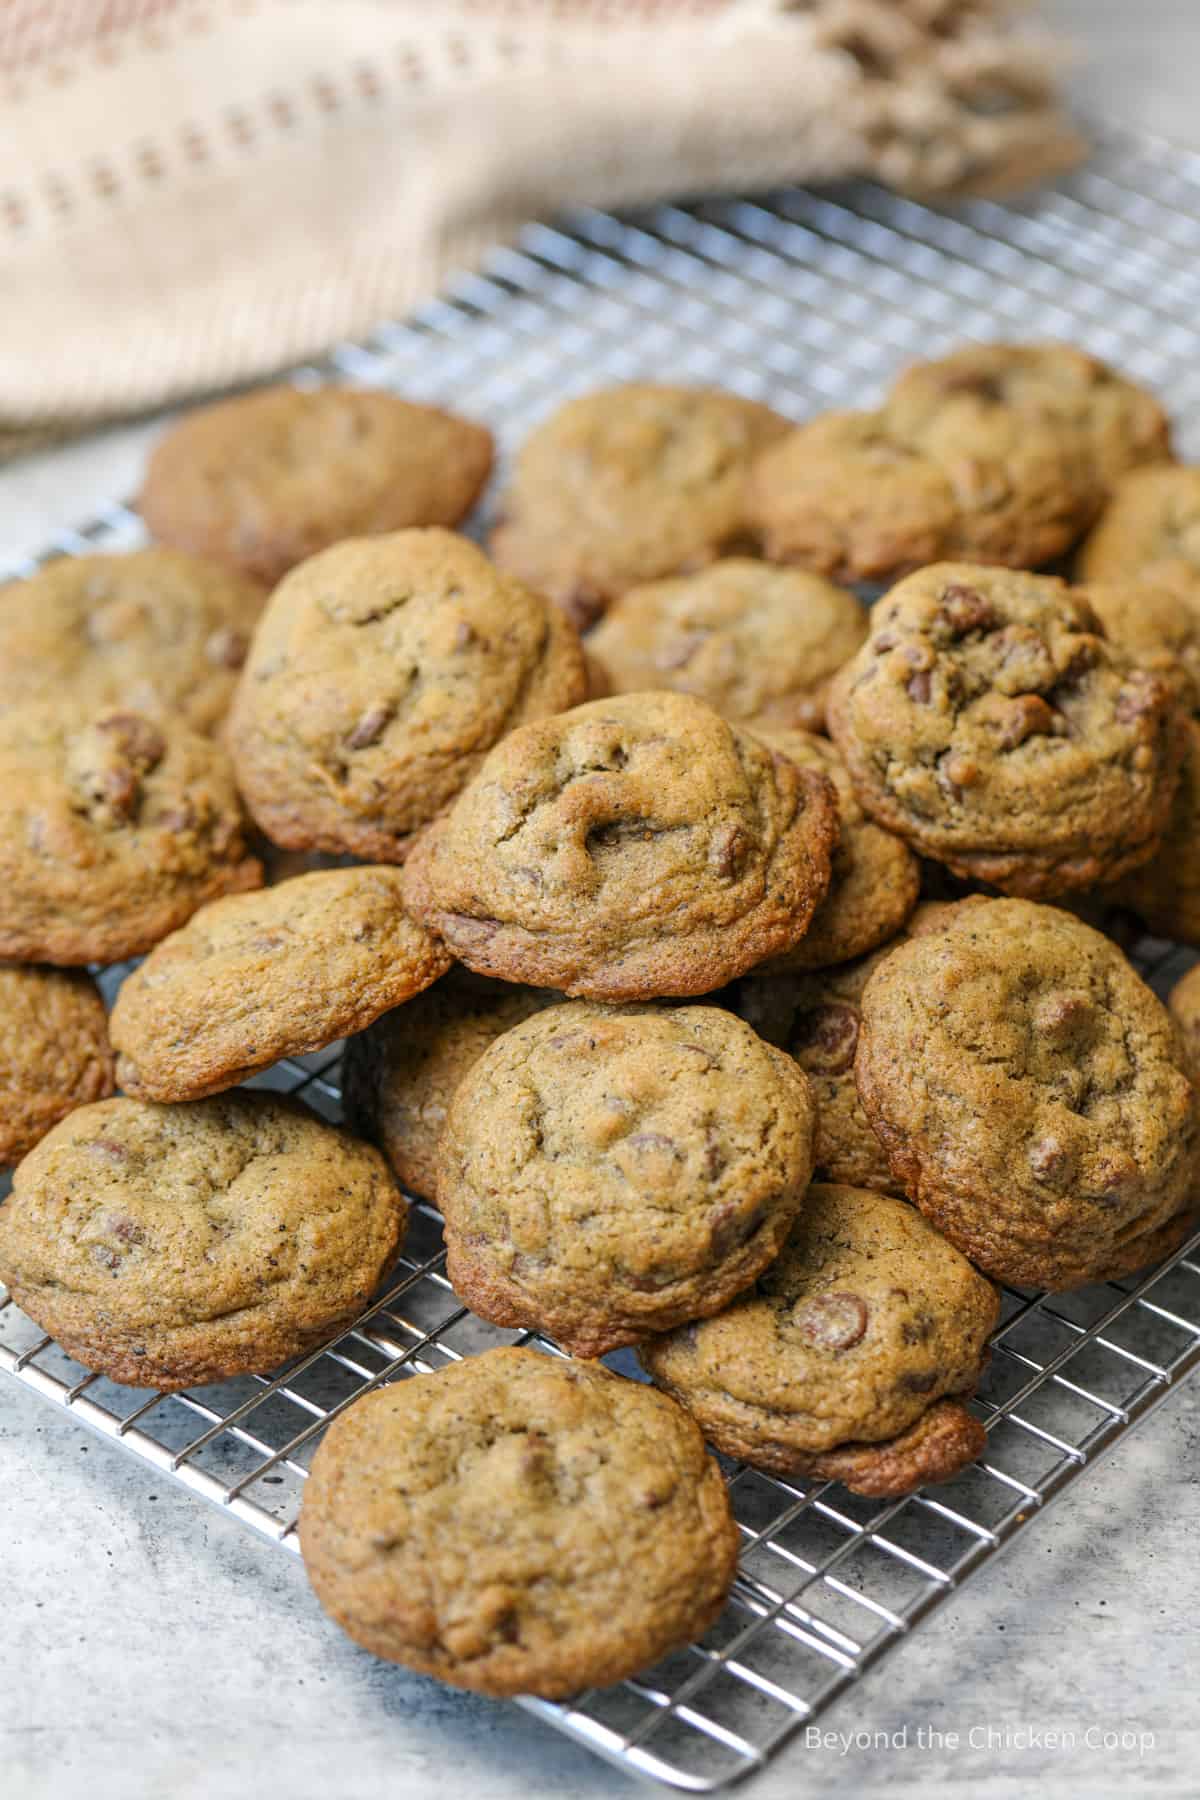 Cookies piled on a baking rack.